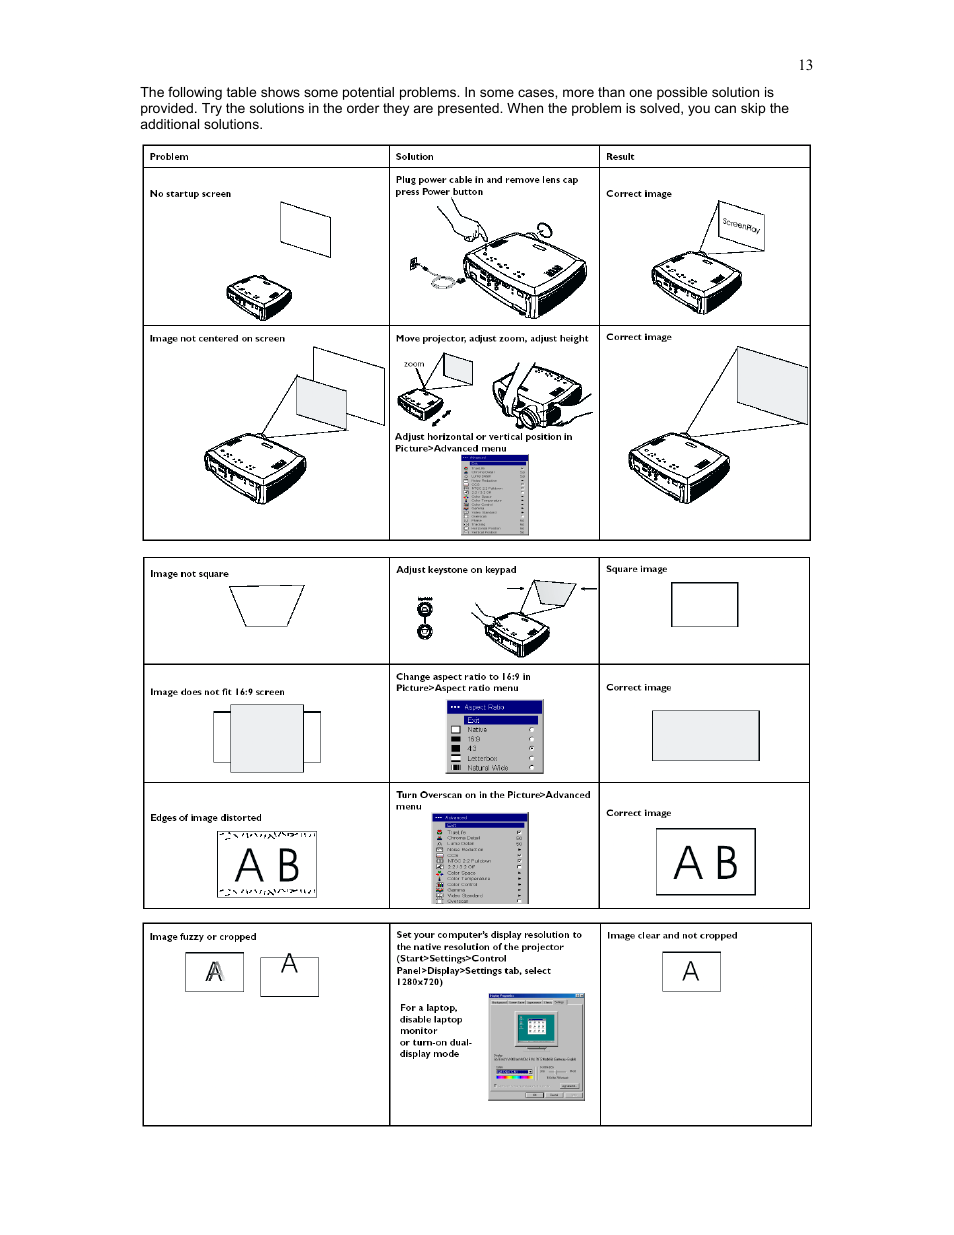 Knoll Systems HD272 User Manual | Page 13 / 34